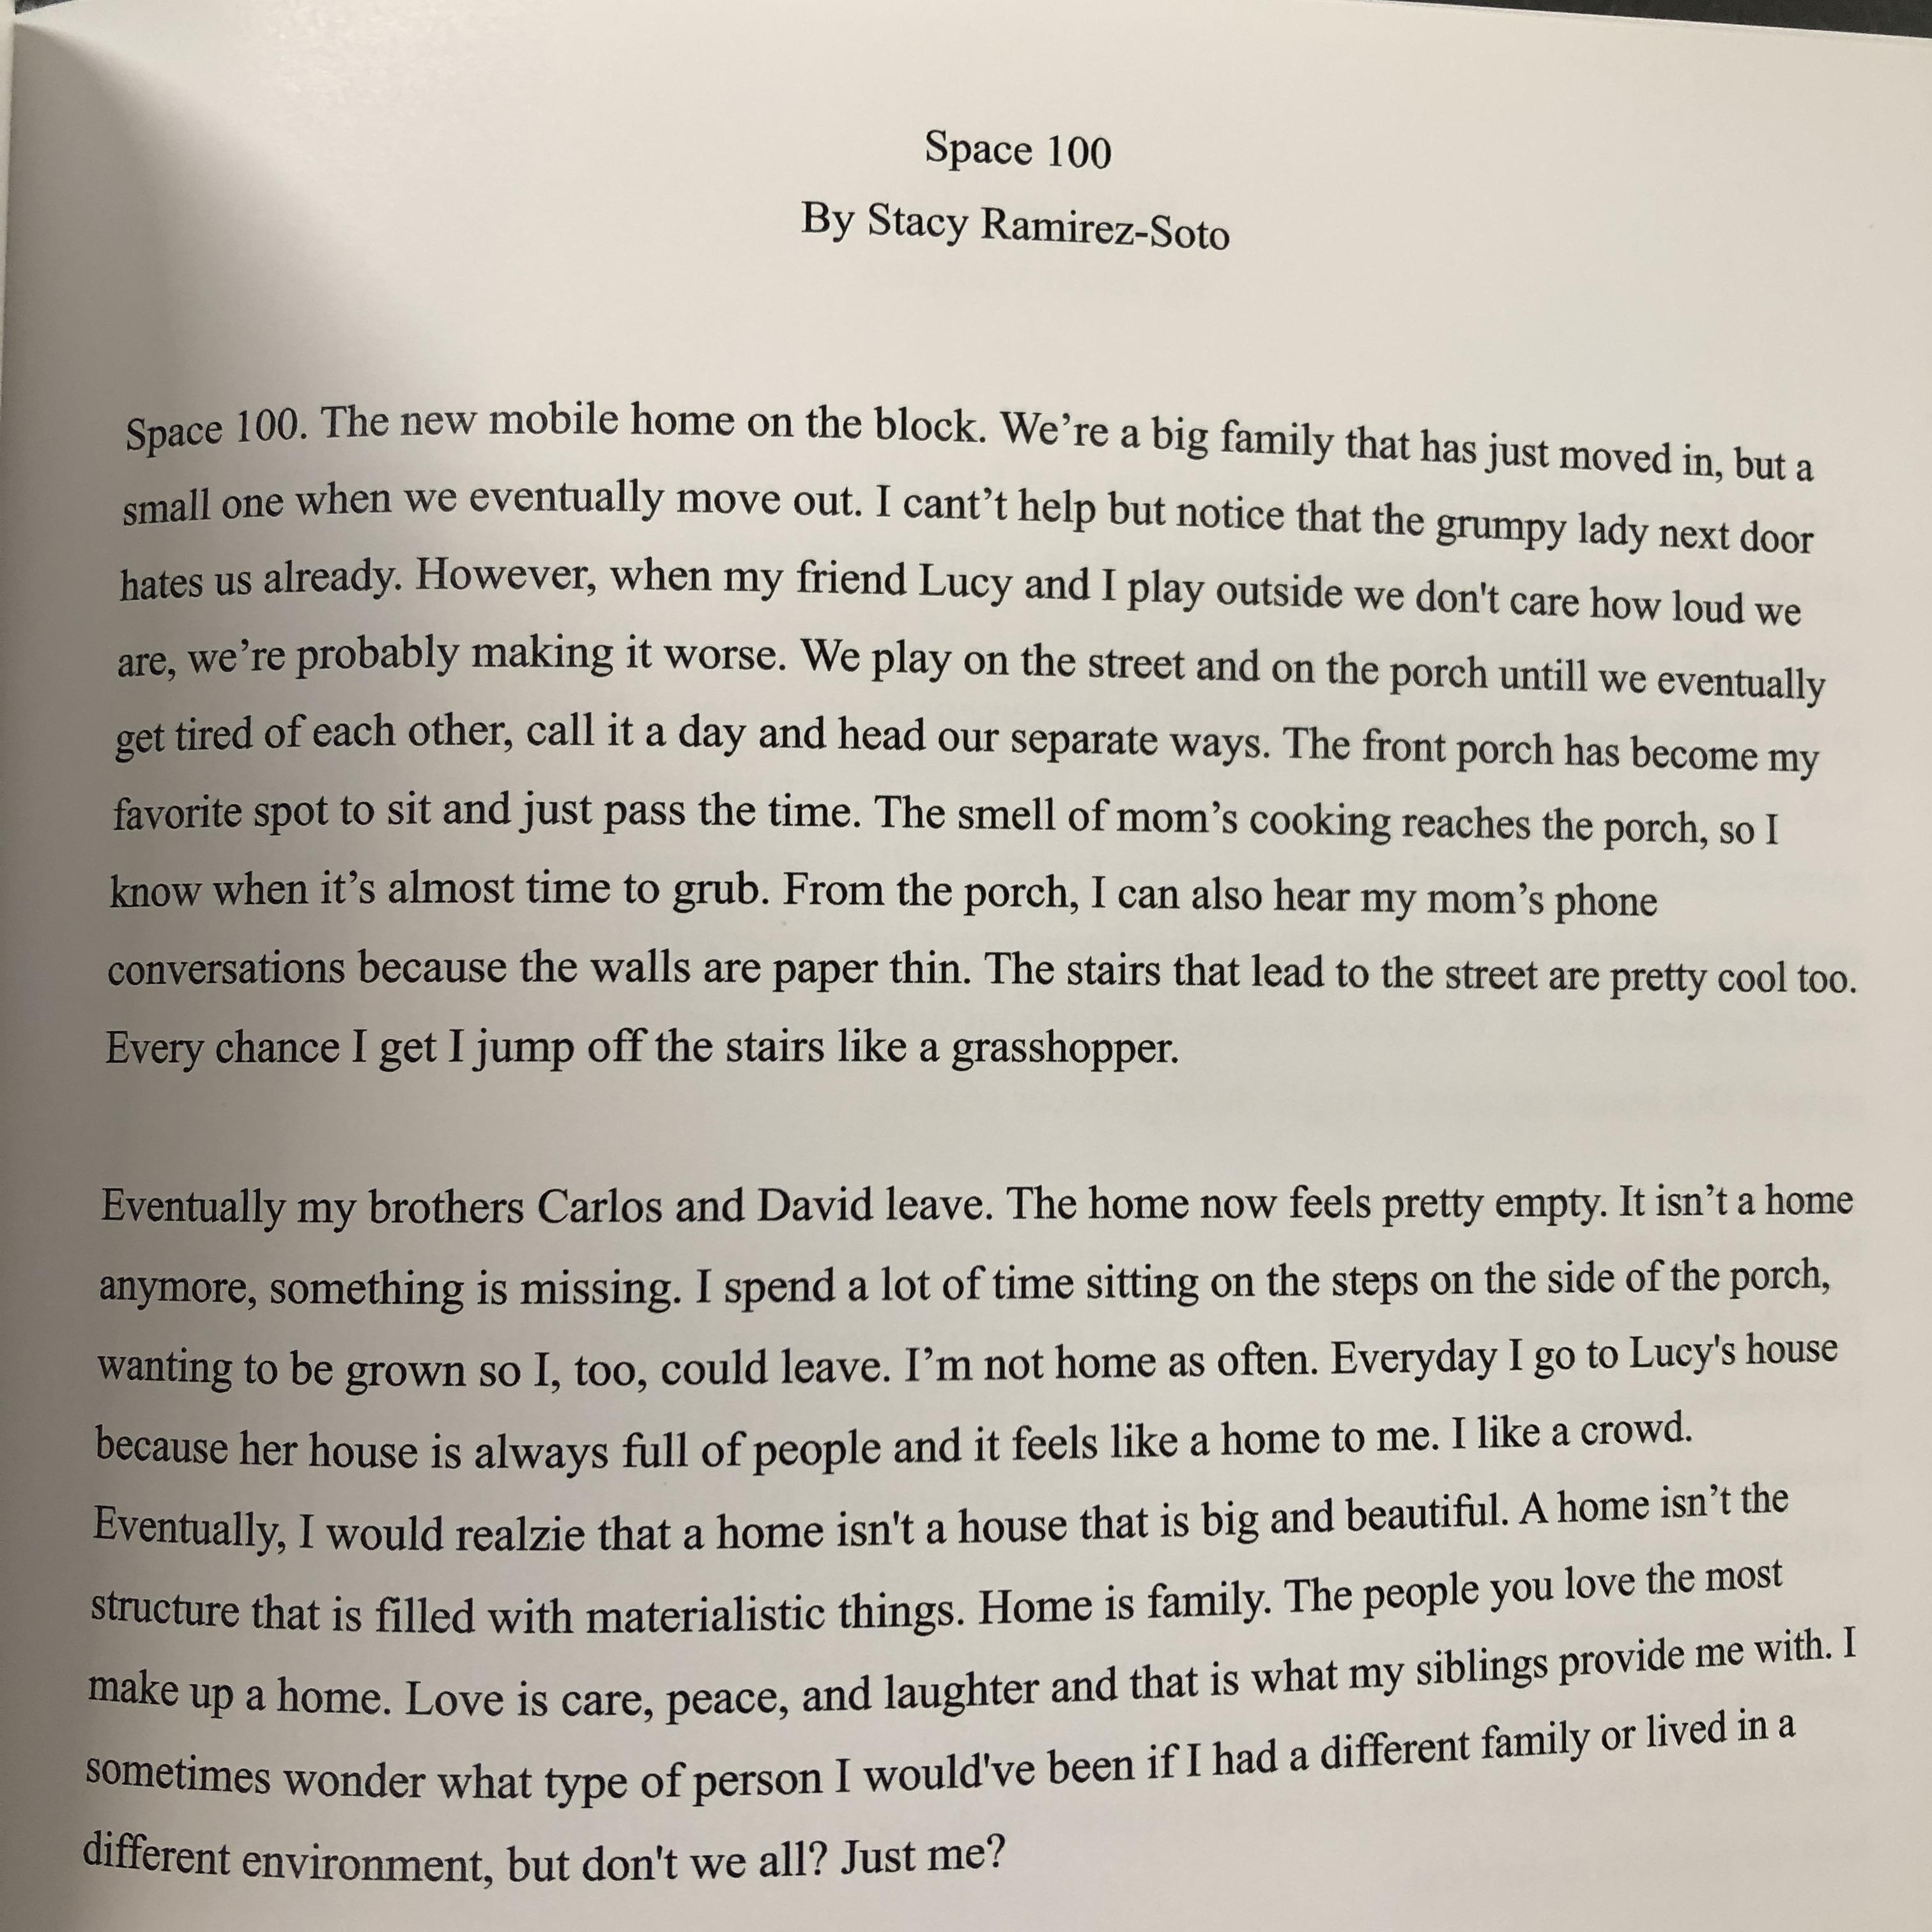 a piece of student writing called "Space 100" by Stacy Ramirez-Soto